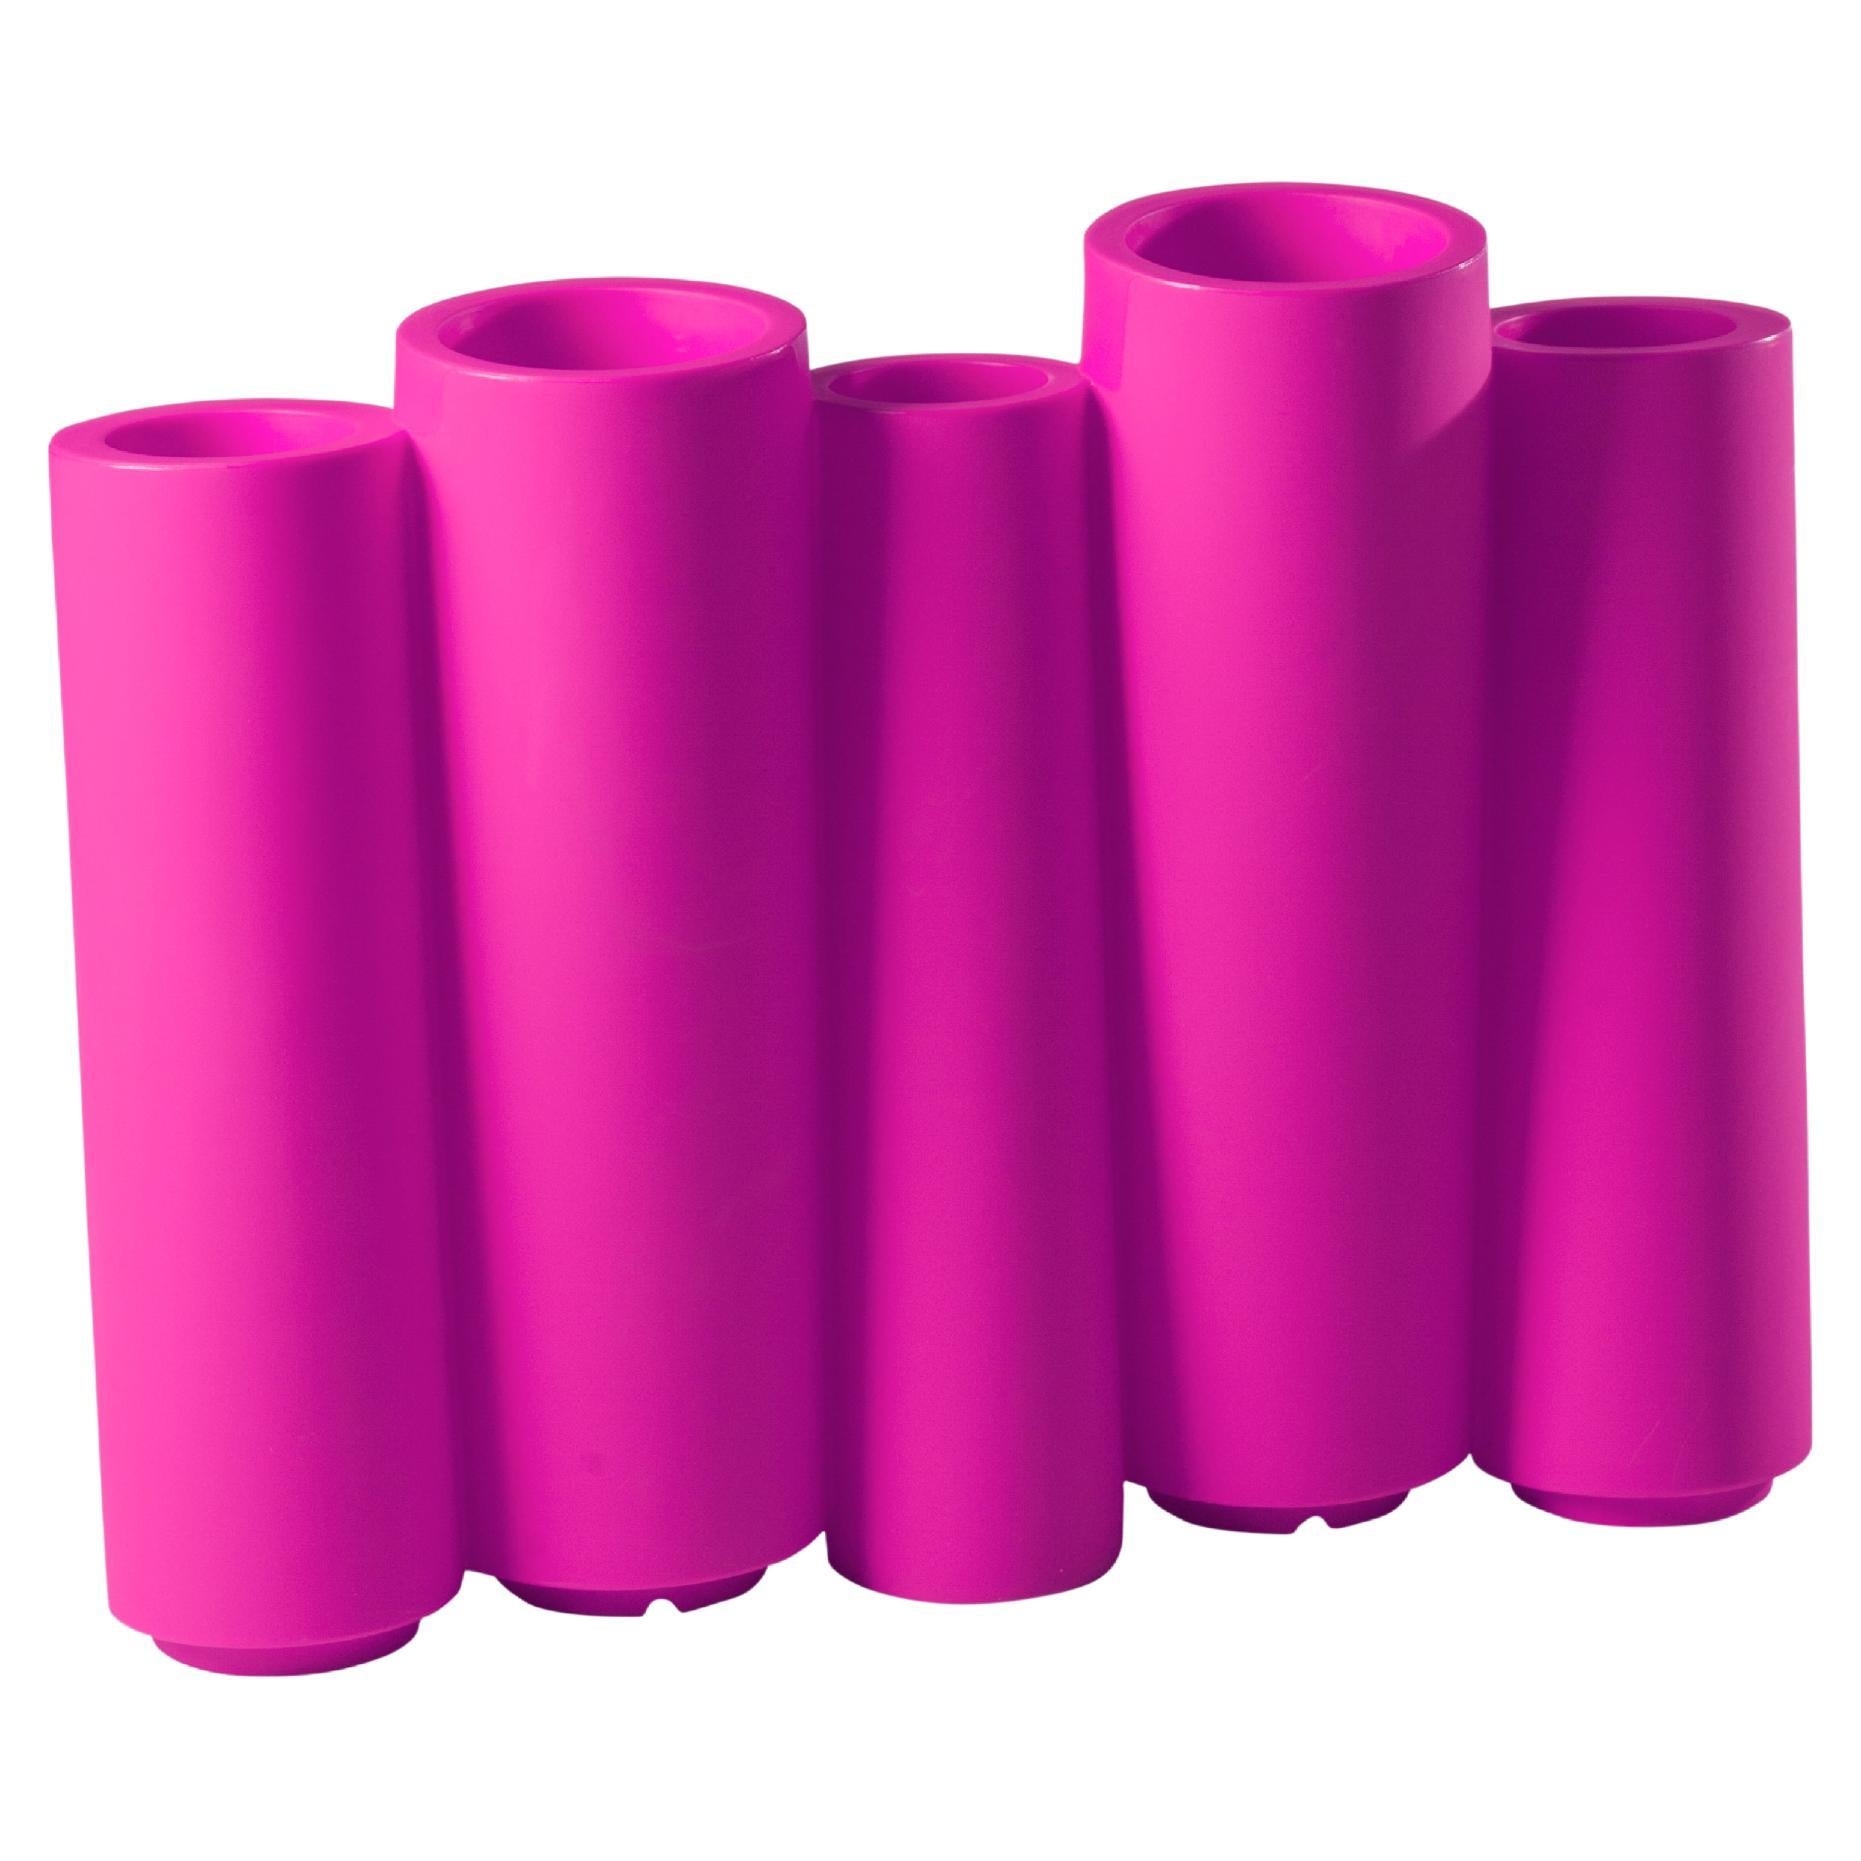 Slide Design Bamboo Cachepot in Sweet Fuchsia by Tous Les Trois